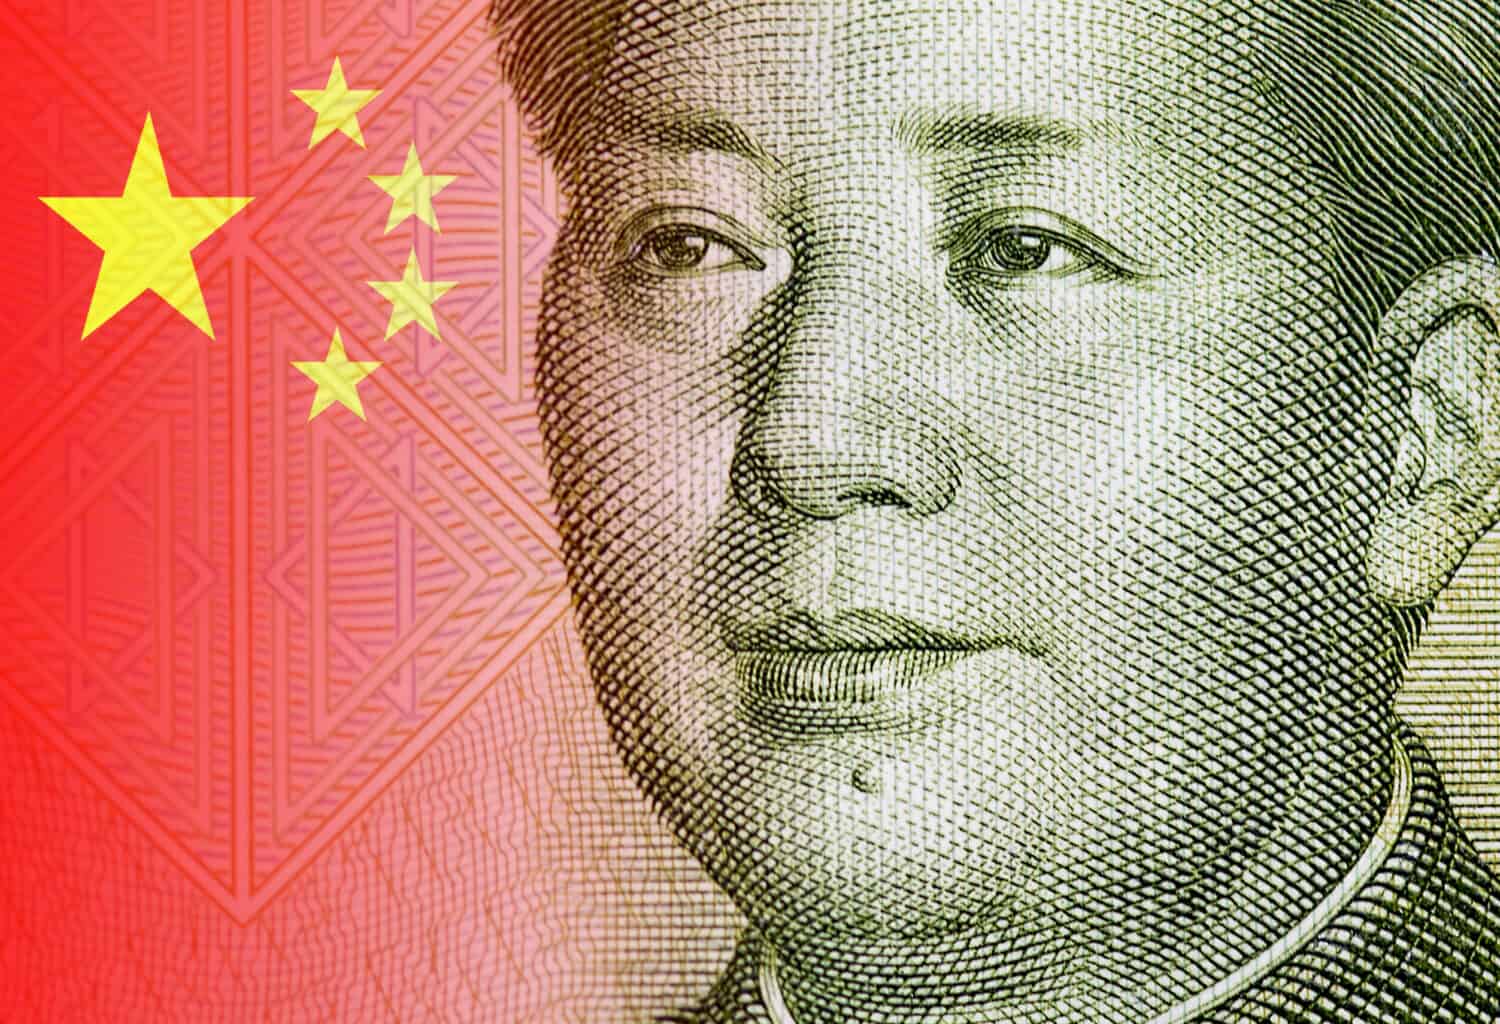 Close-up portrait of Mao Zedong, portrait of the chairman Mao and detail of Chinese flag